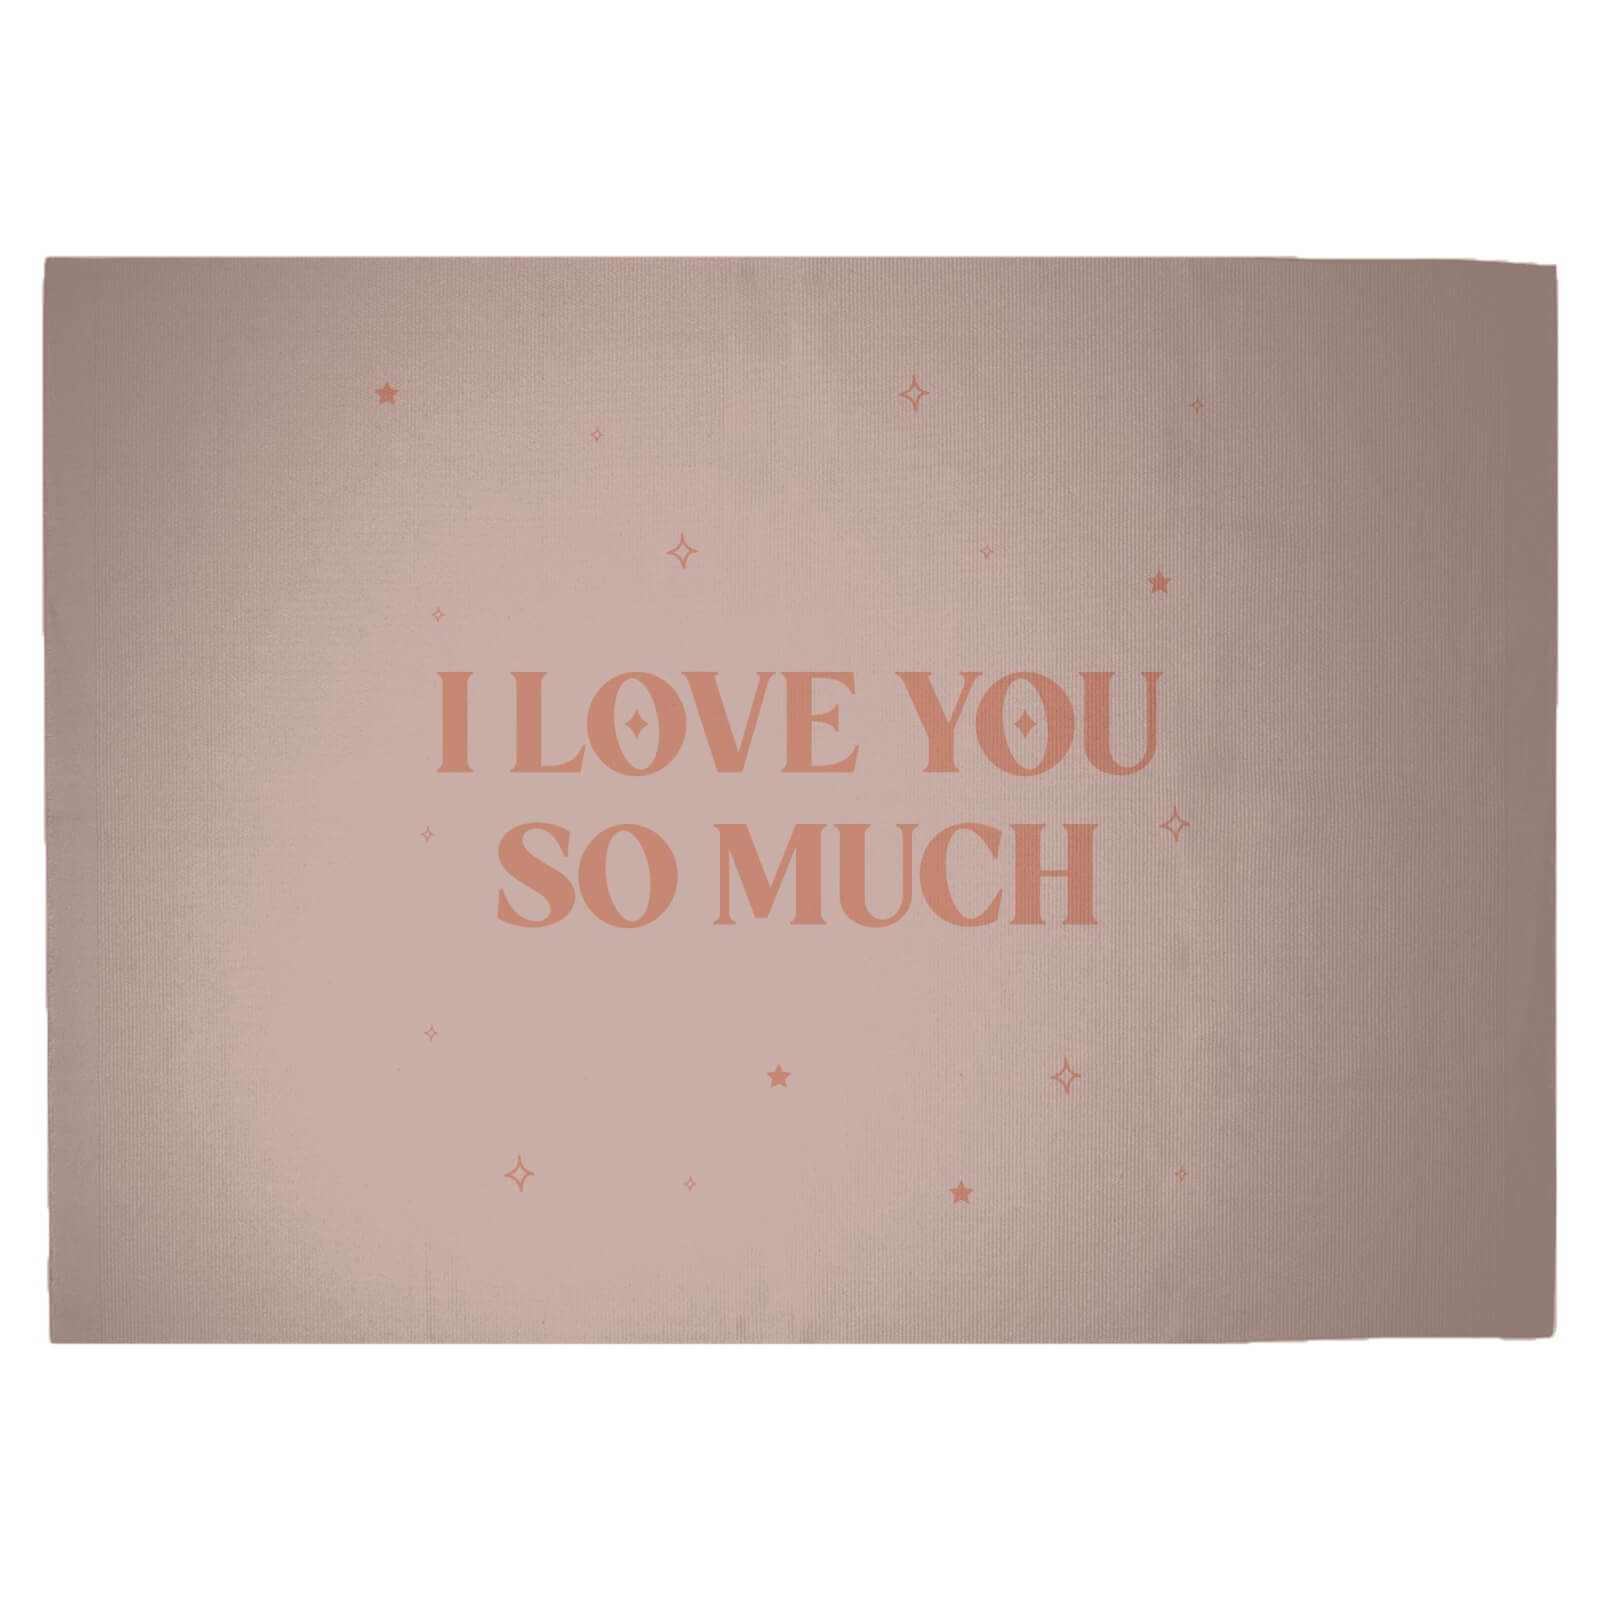 I Love You So Much Woven Rug - Large